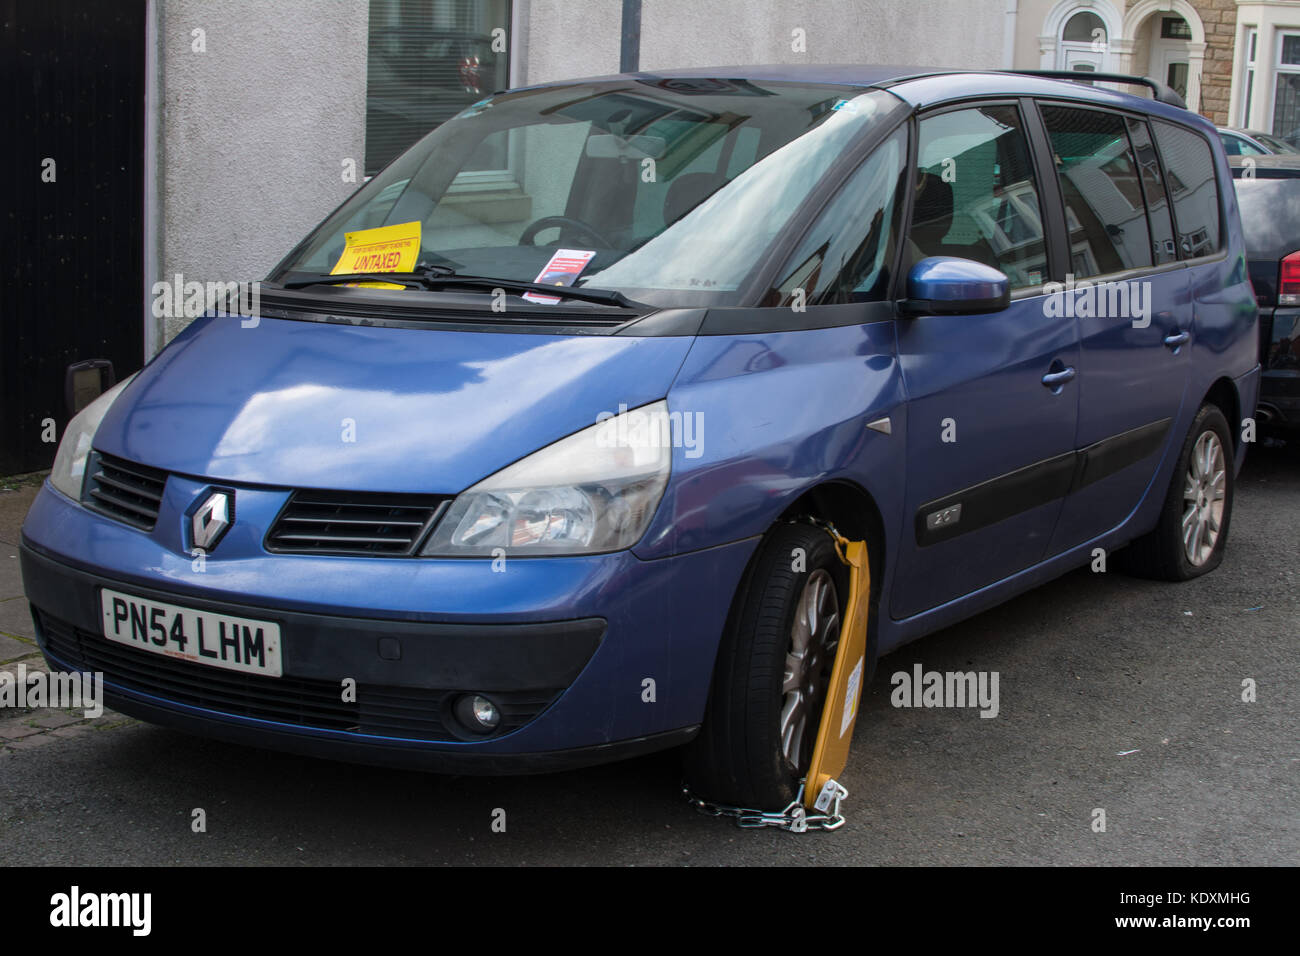 Untaxed car Renault car blue metallic colour  ticket fined fine clamp clamped sign signs badge tinted window windows tax taxed untaxed parked fined Stock Photo